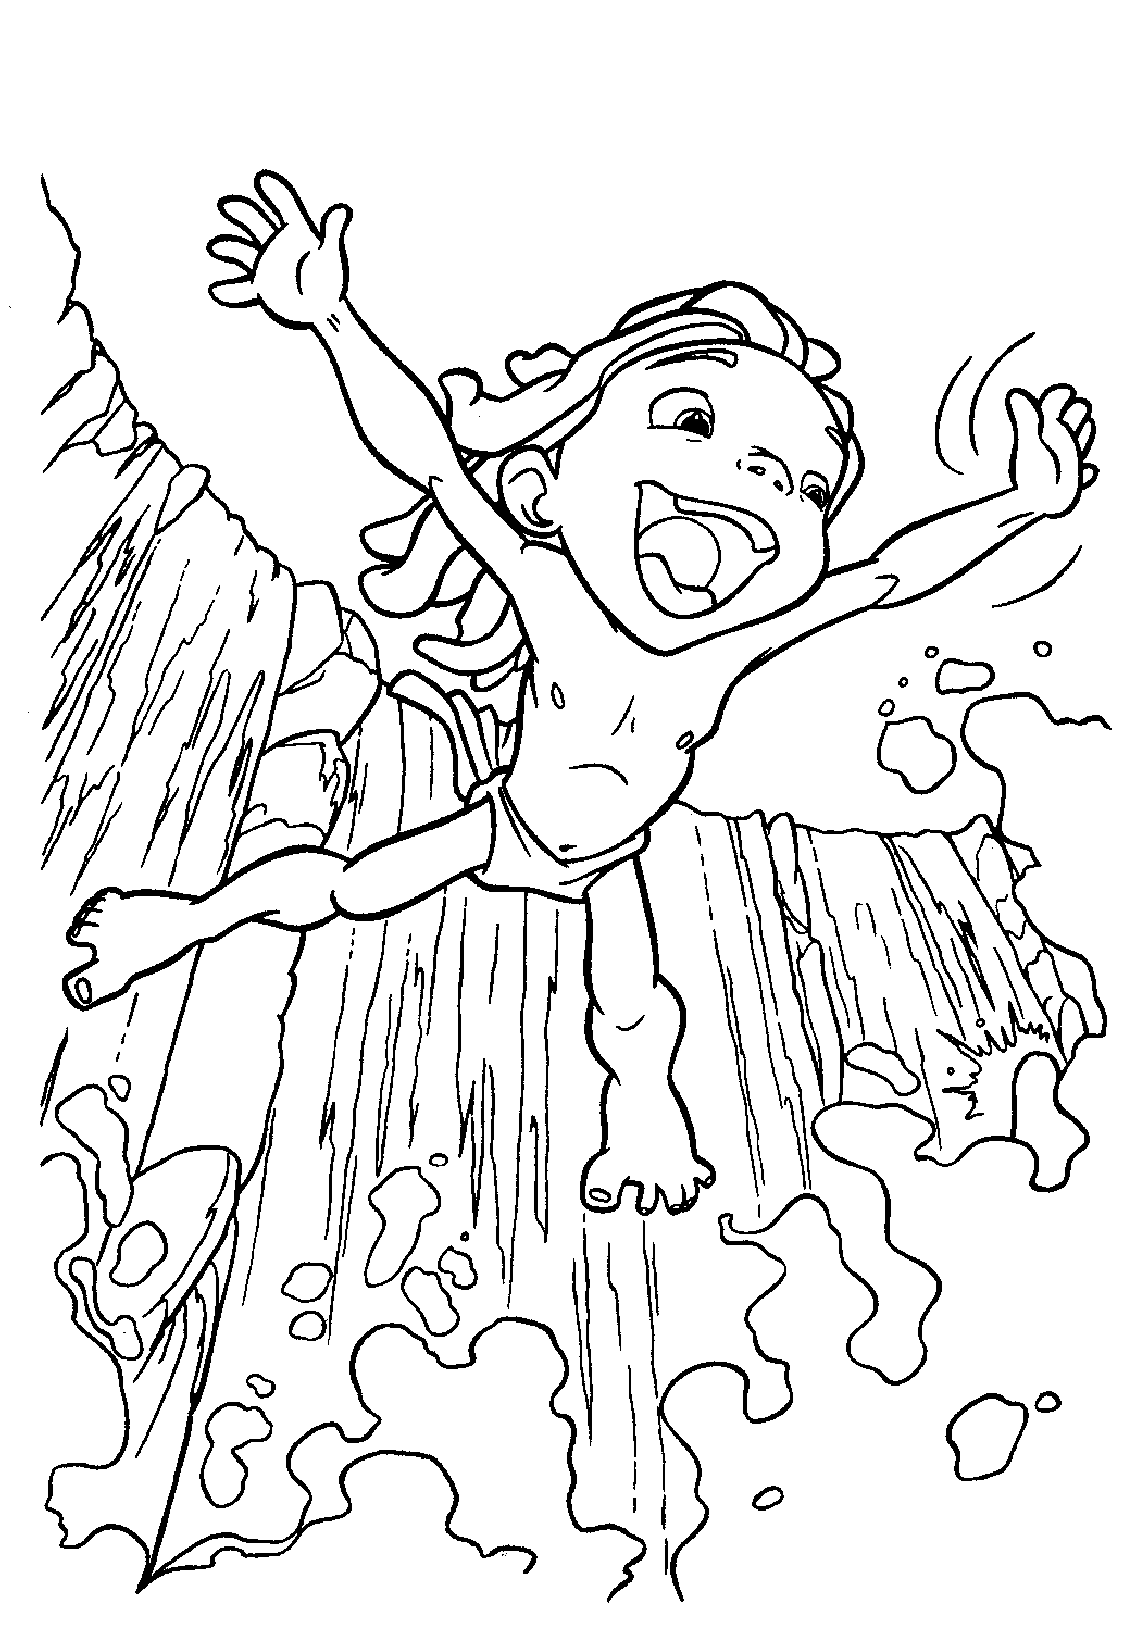 Tarzan Coloring Pages - Best Coloring Pages For Kids